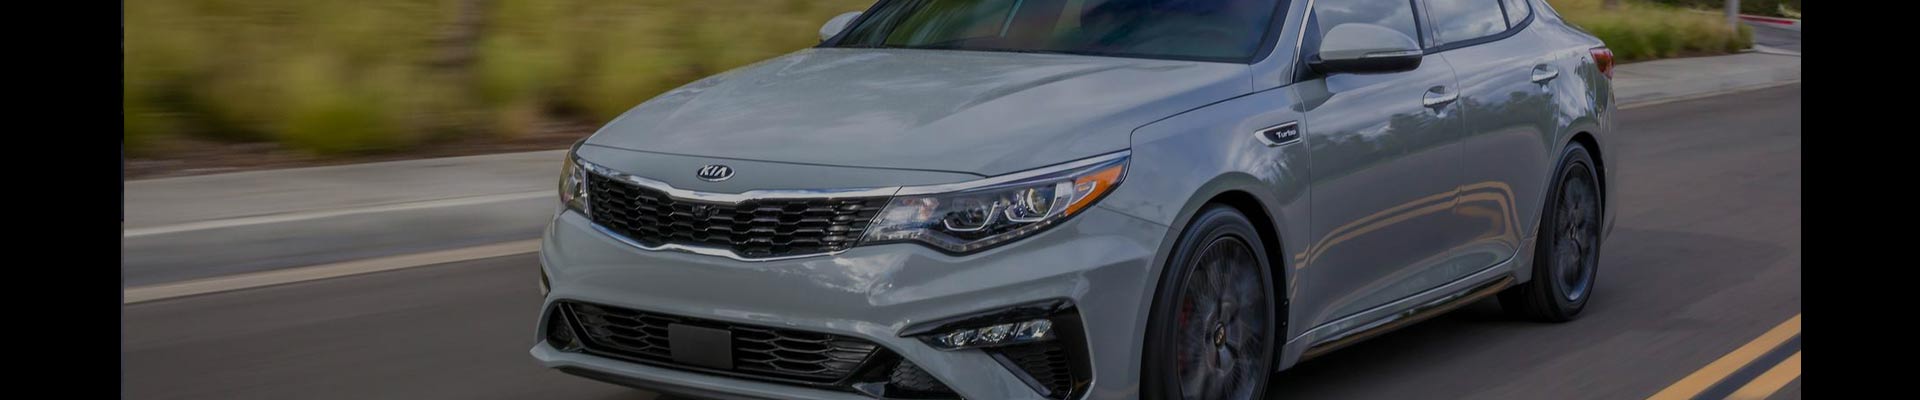 Shop Replacement and OEM 2018 Kia Optima Parts with Discounted Price on the Net